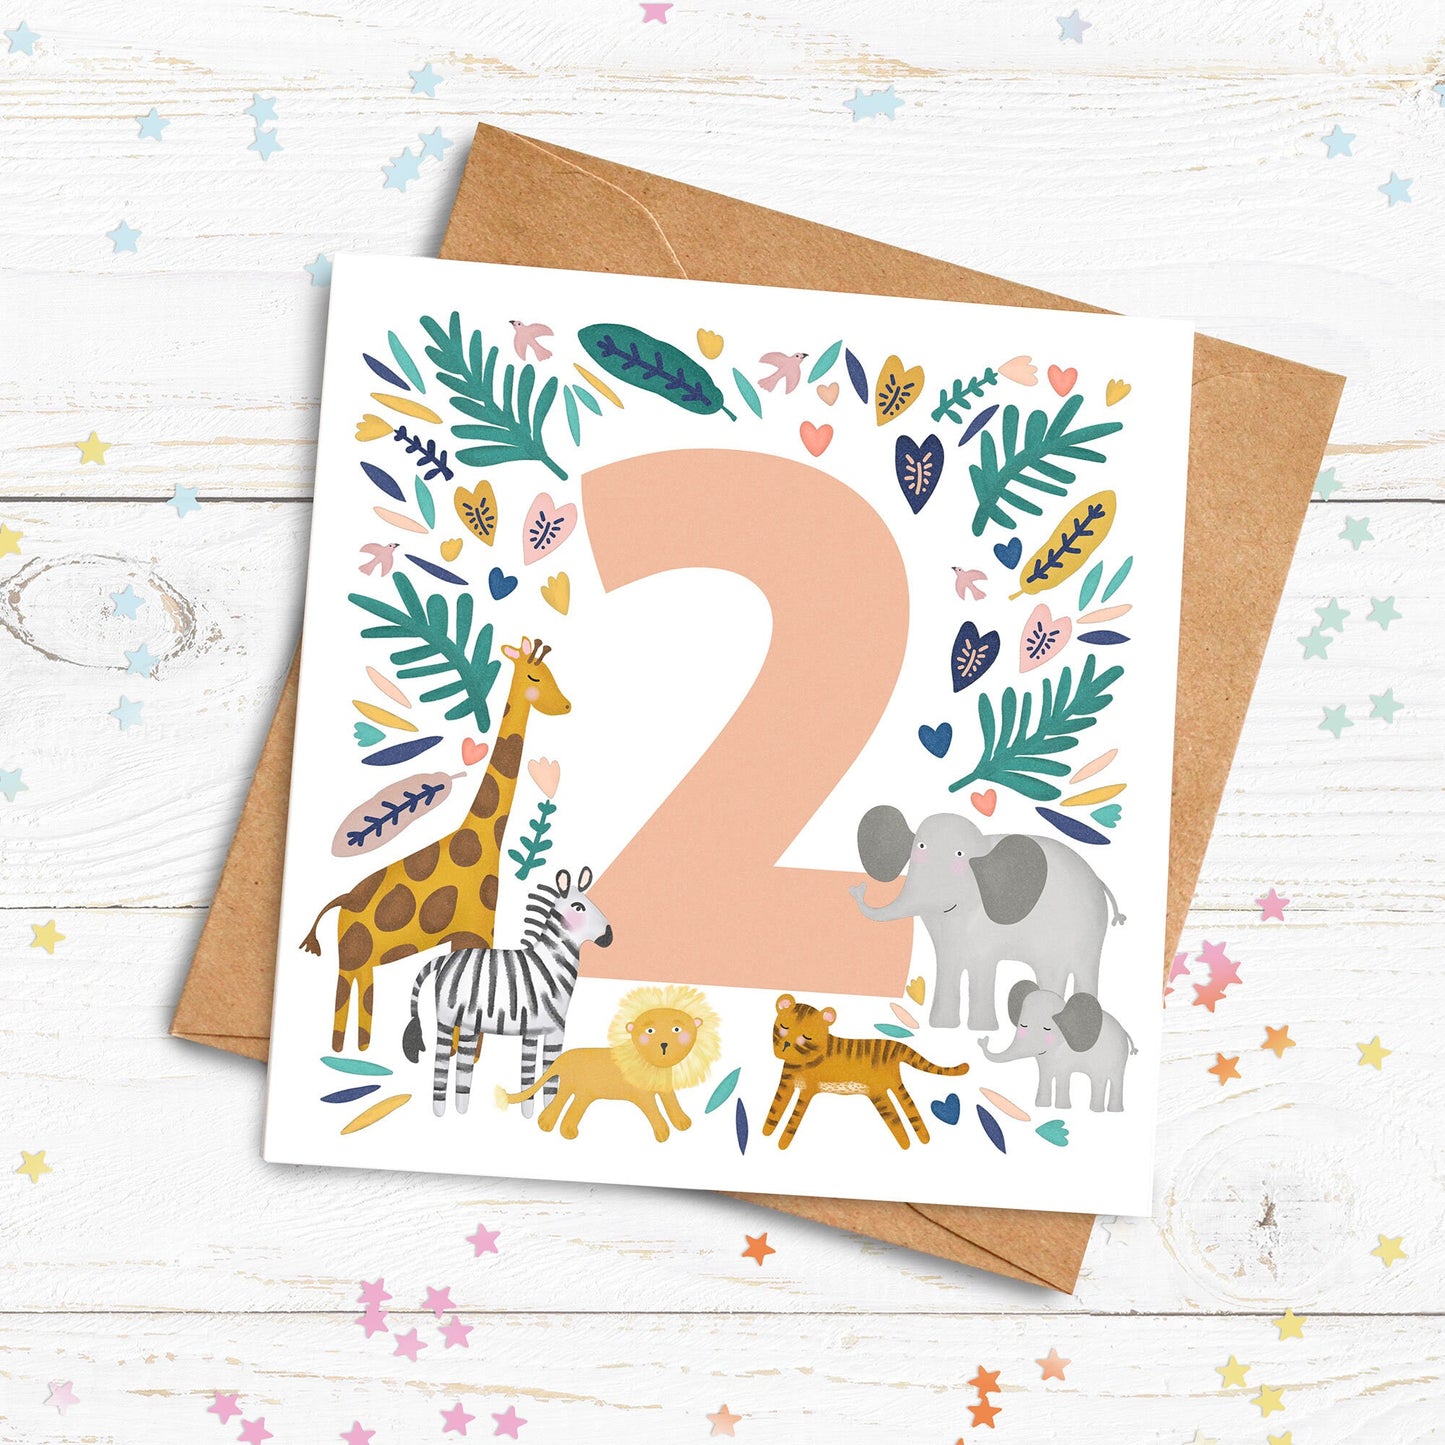 Animal Age Card. Personalised Age Card. Cute Big Number Card. Cute Safari Animals personalised card. Send Direct Option.